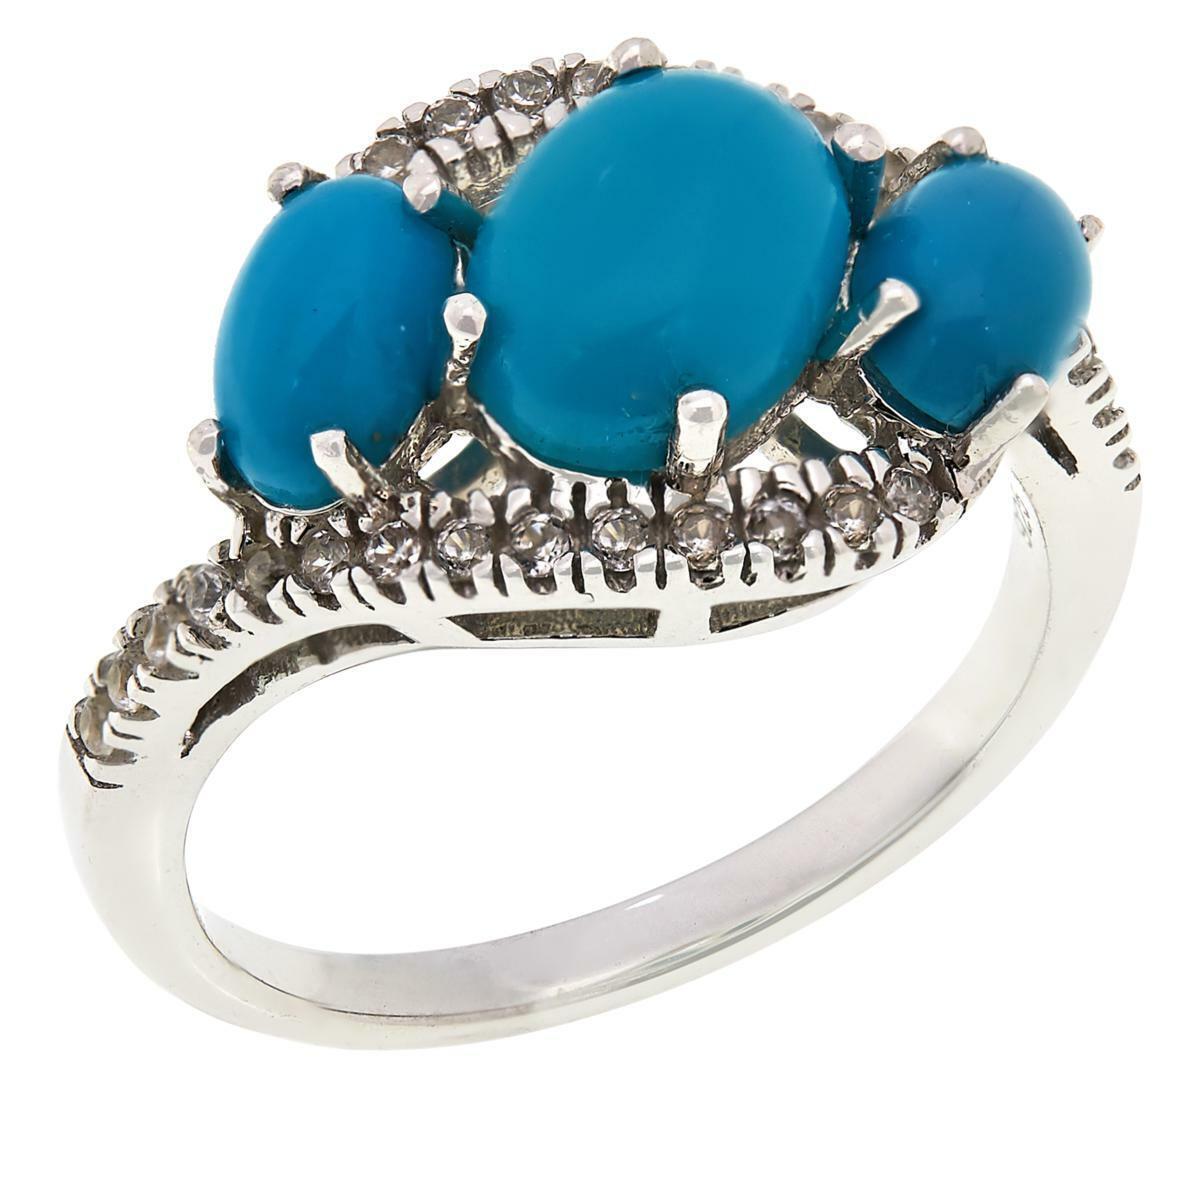 Colleen Lopez Sterling Silver Turquoise and White Zircon Ring, Size 6